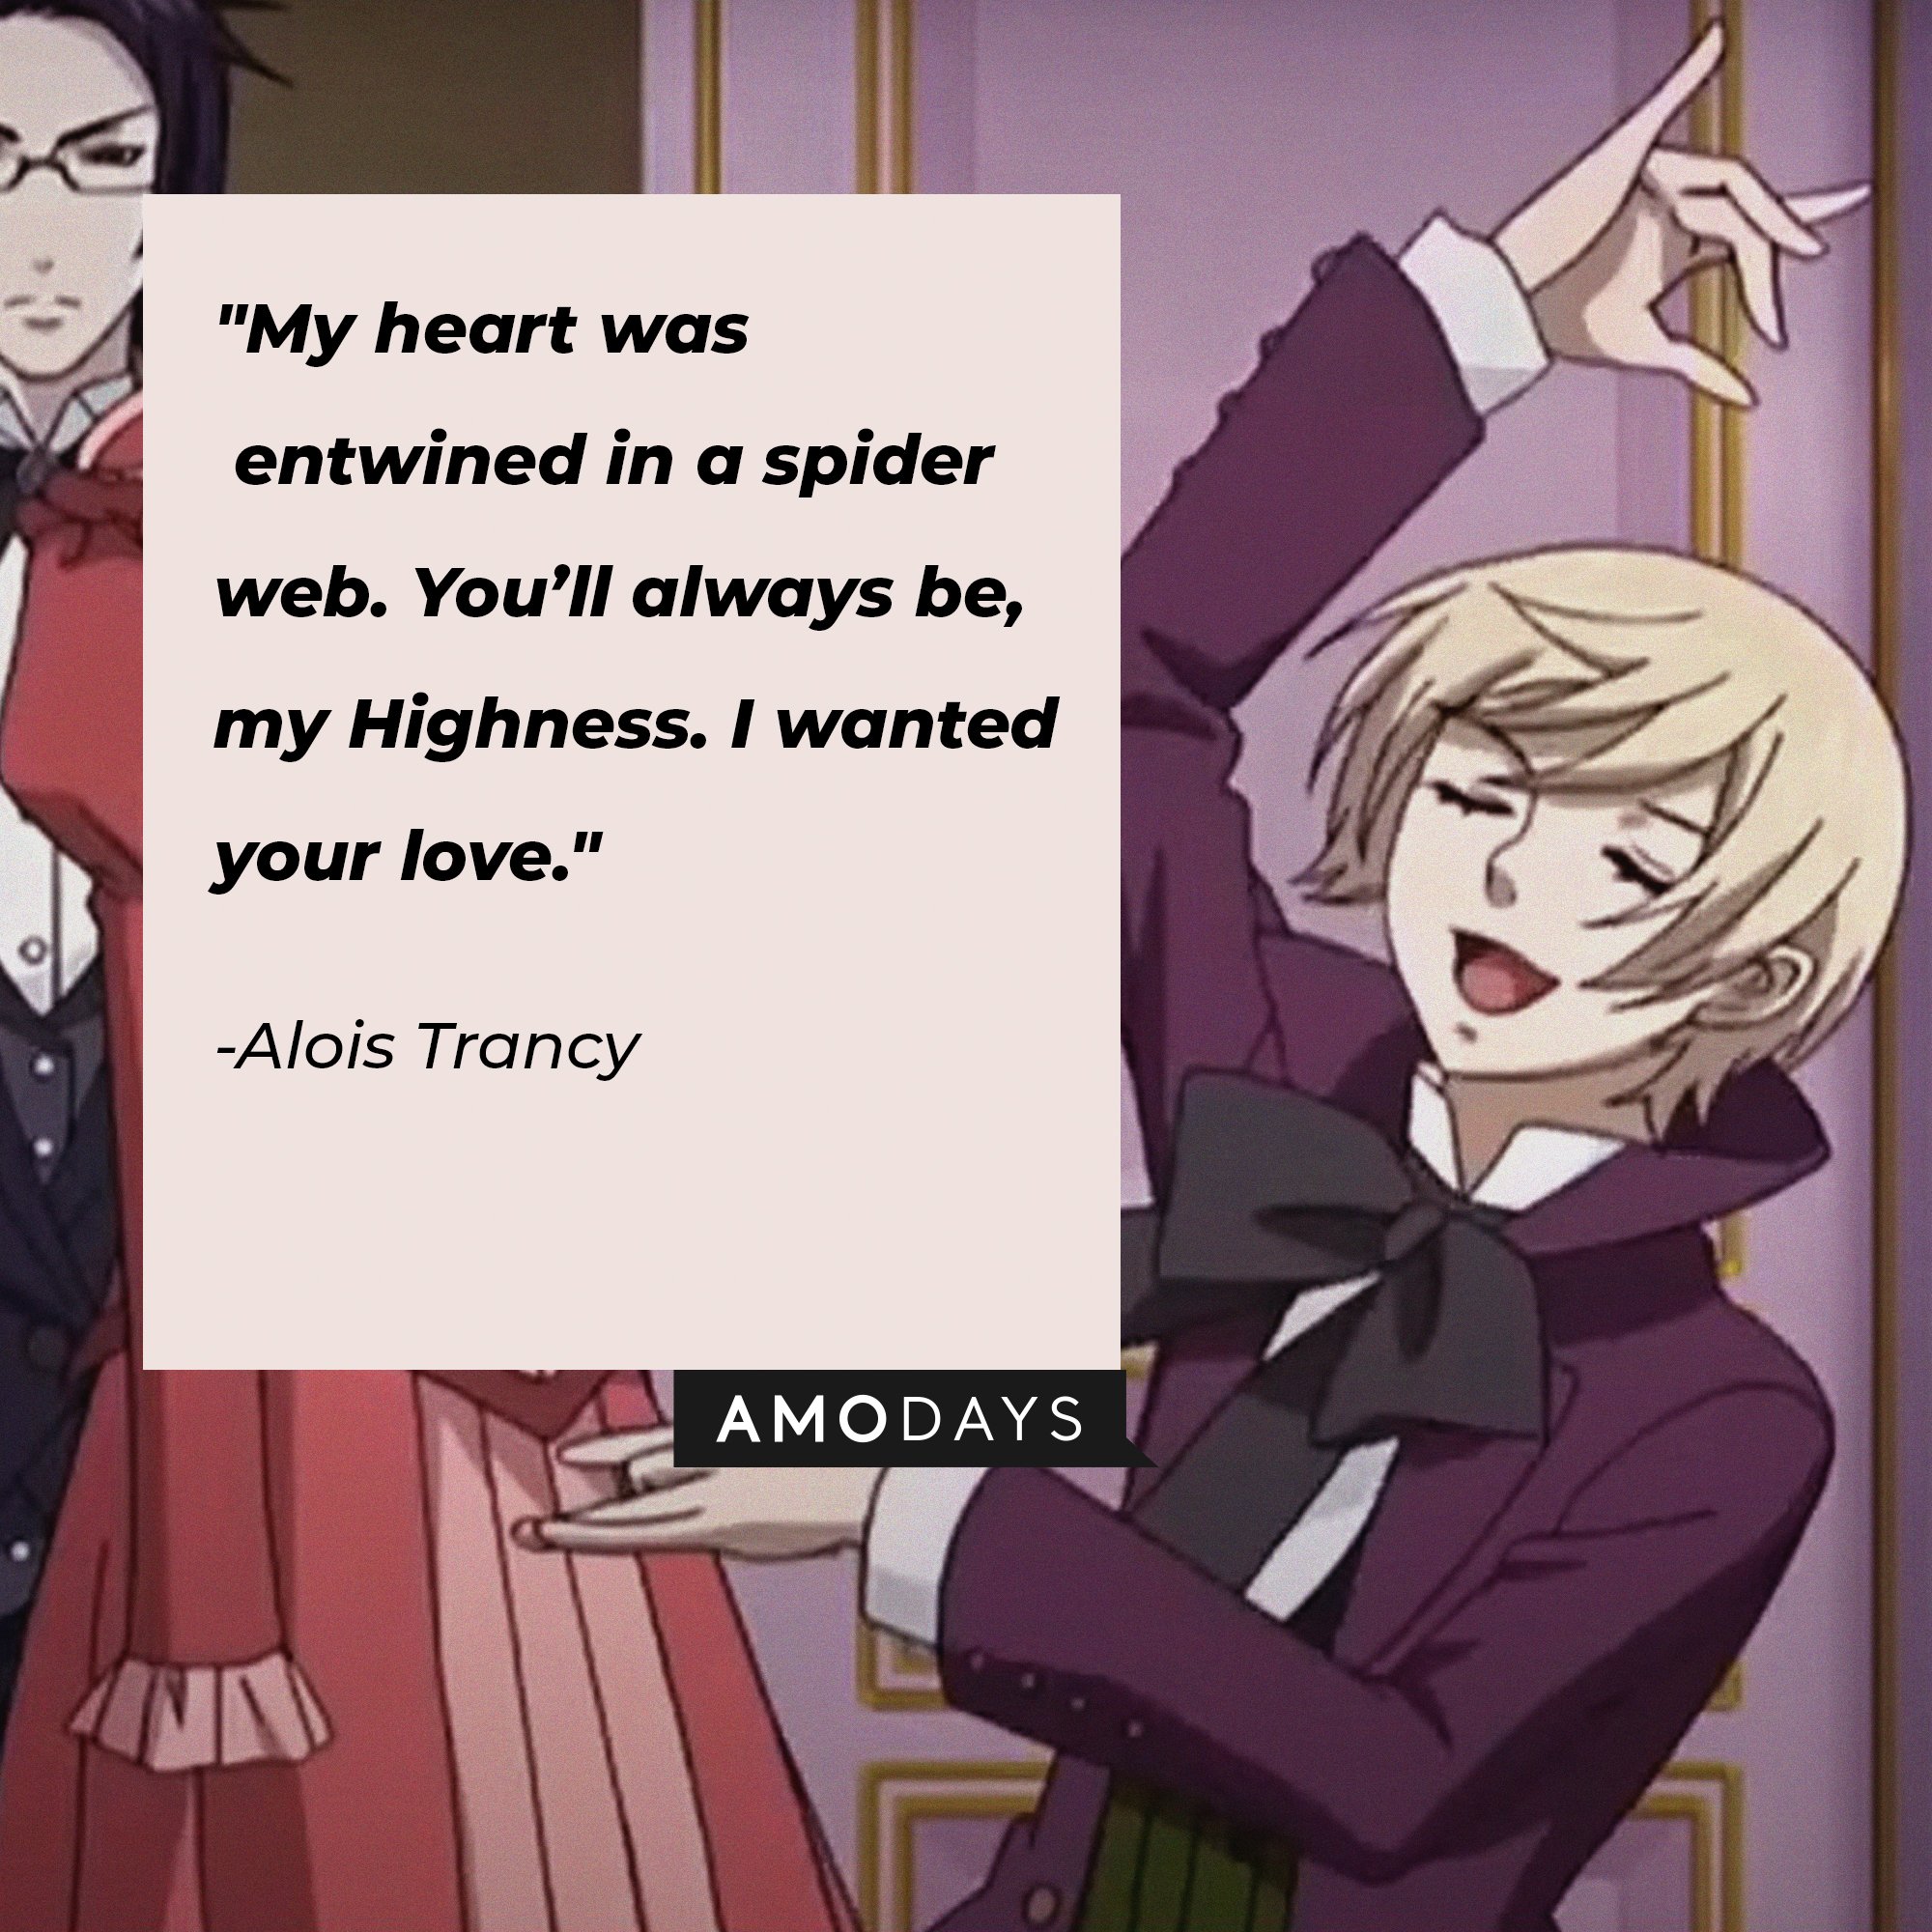 Alois Trancy’s quote: "My heart was entwined in a spider web. You’ll always be, my Highness. I wanted your love." | Image: AmoDays